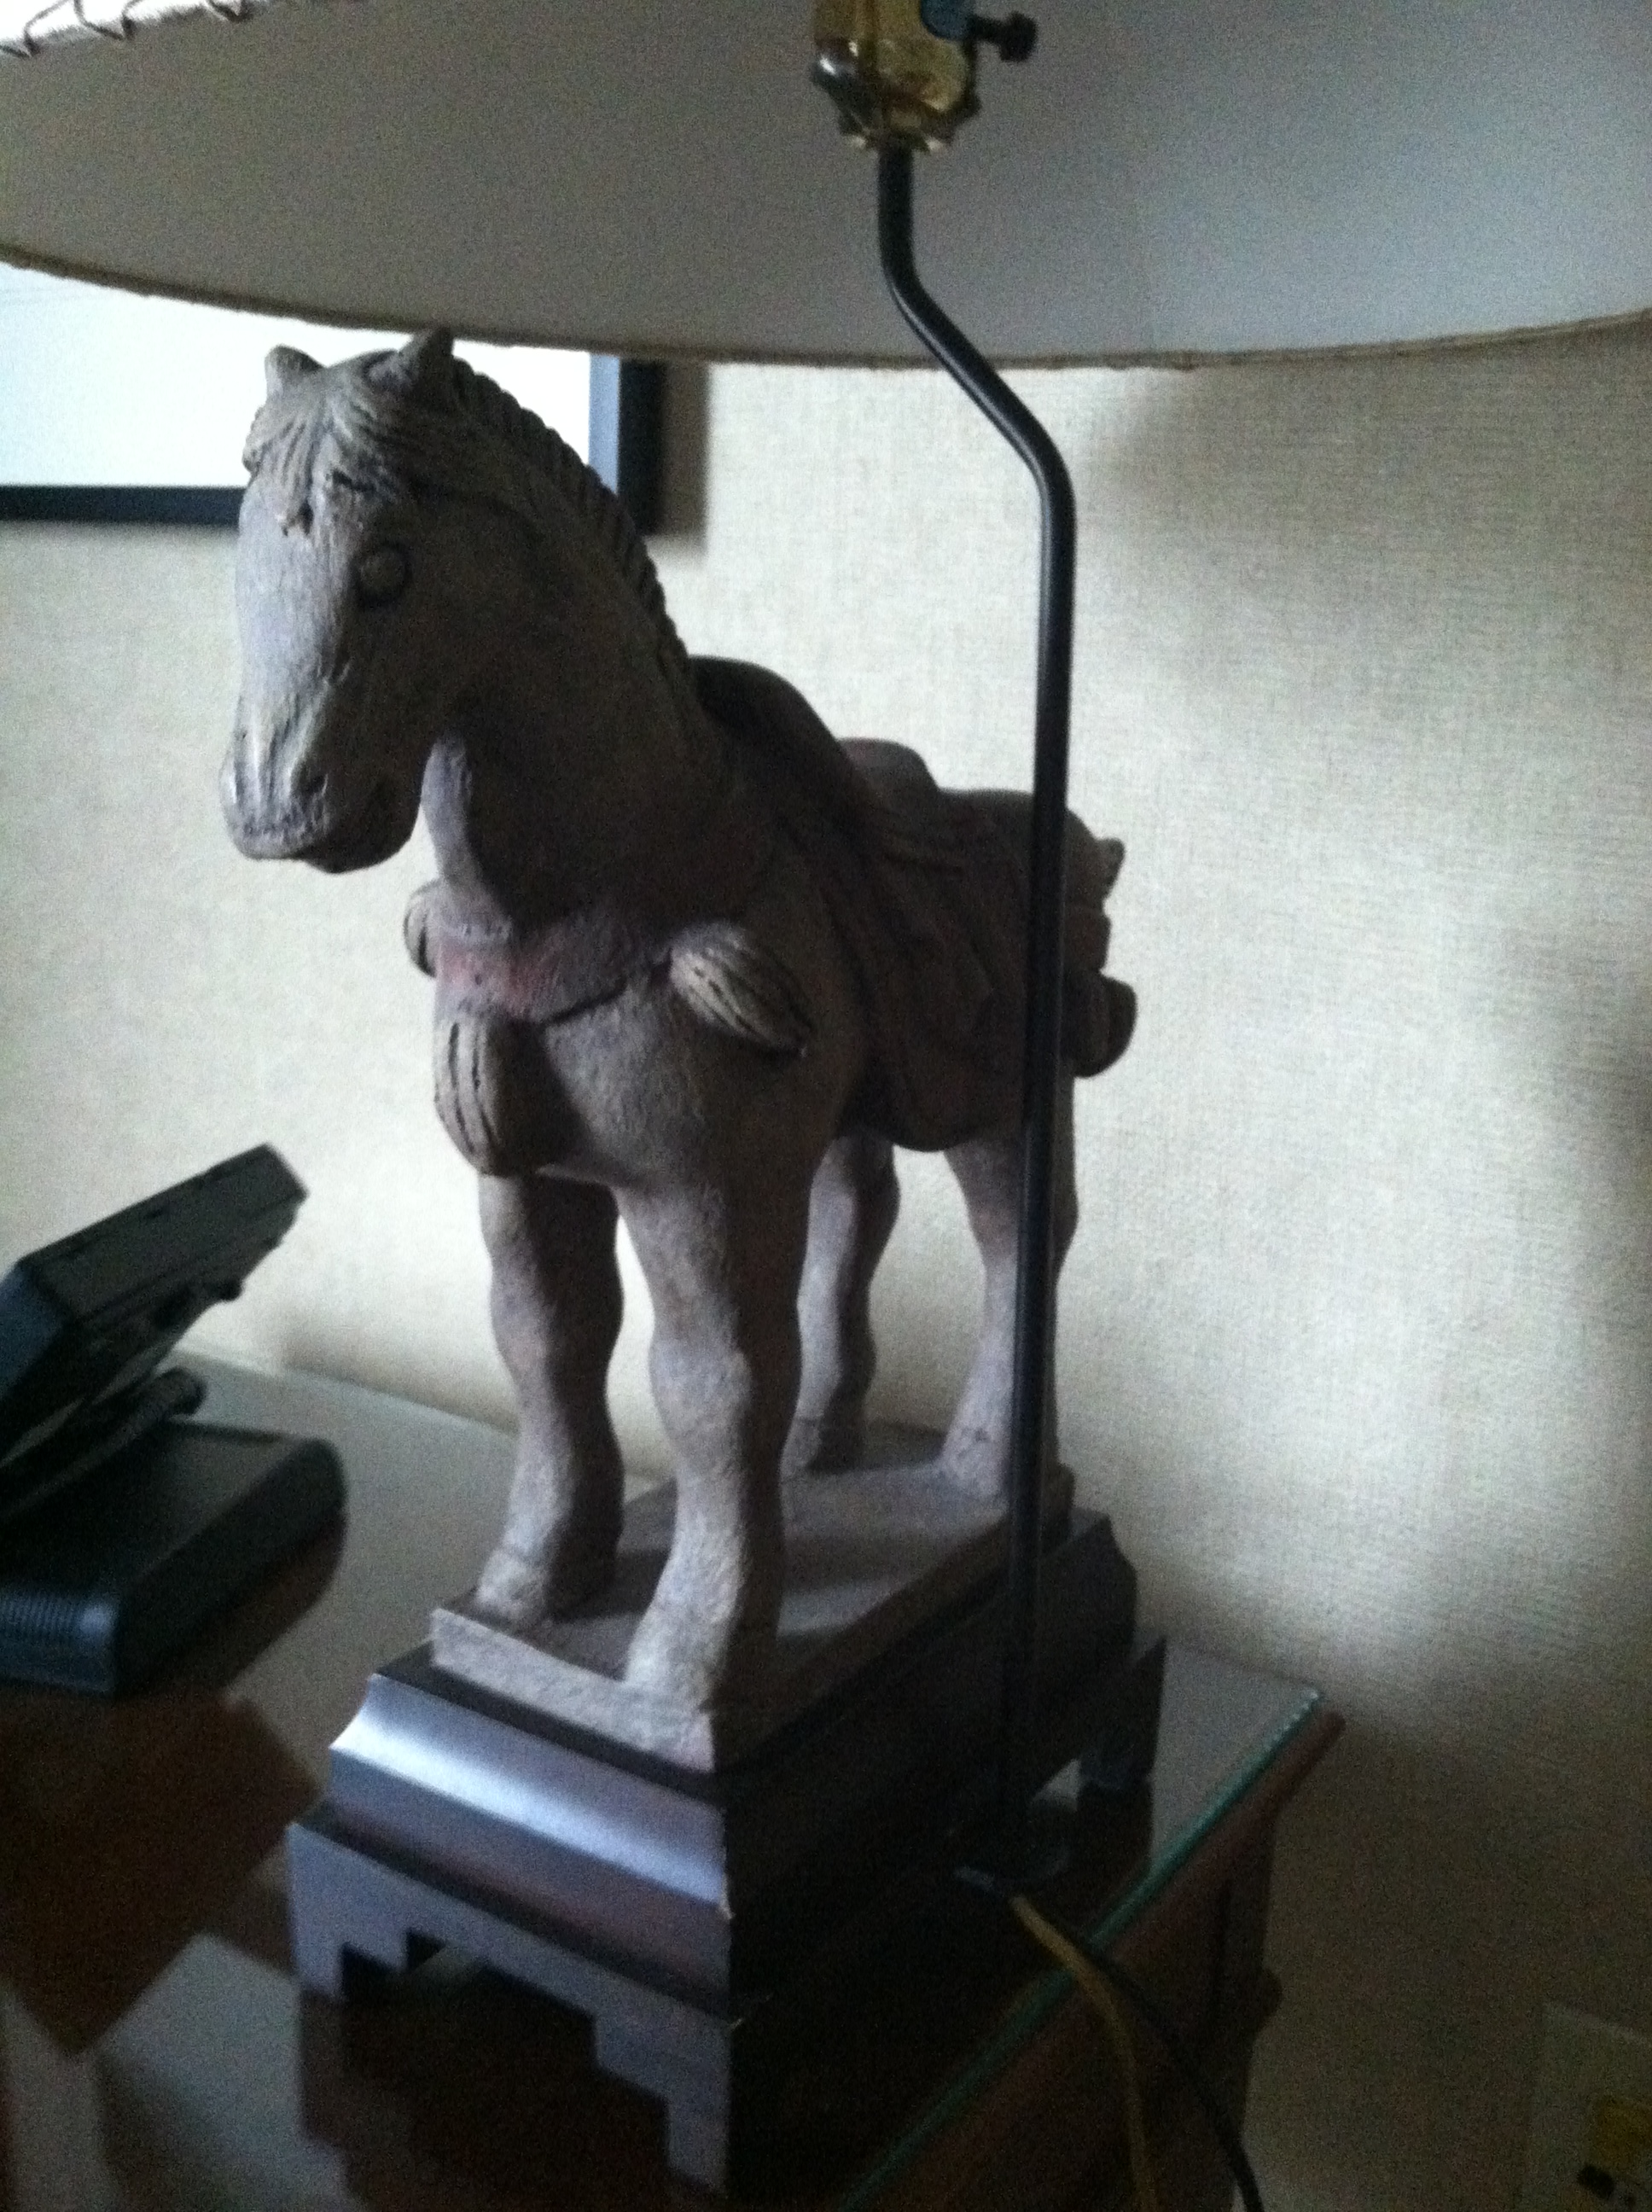 There are even nice artistic touches in the rooms like this lamp.